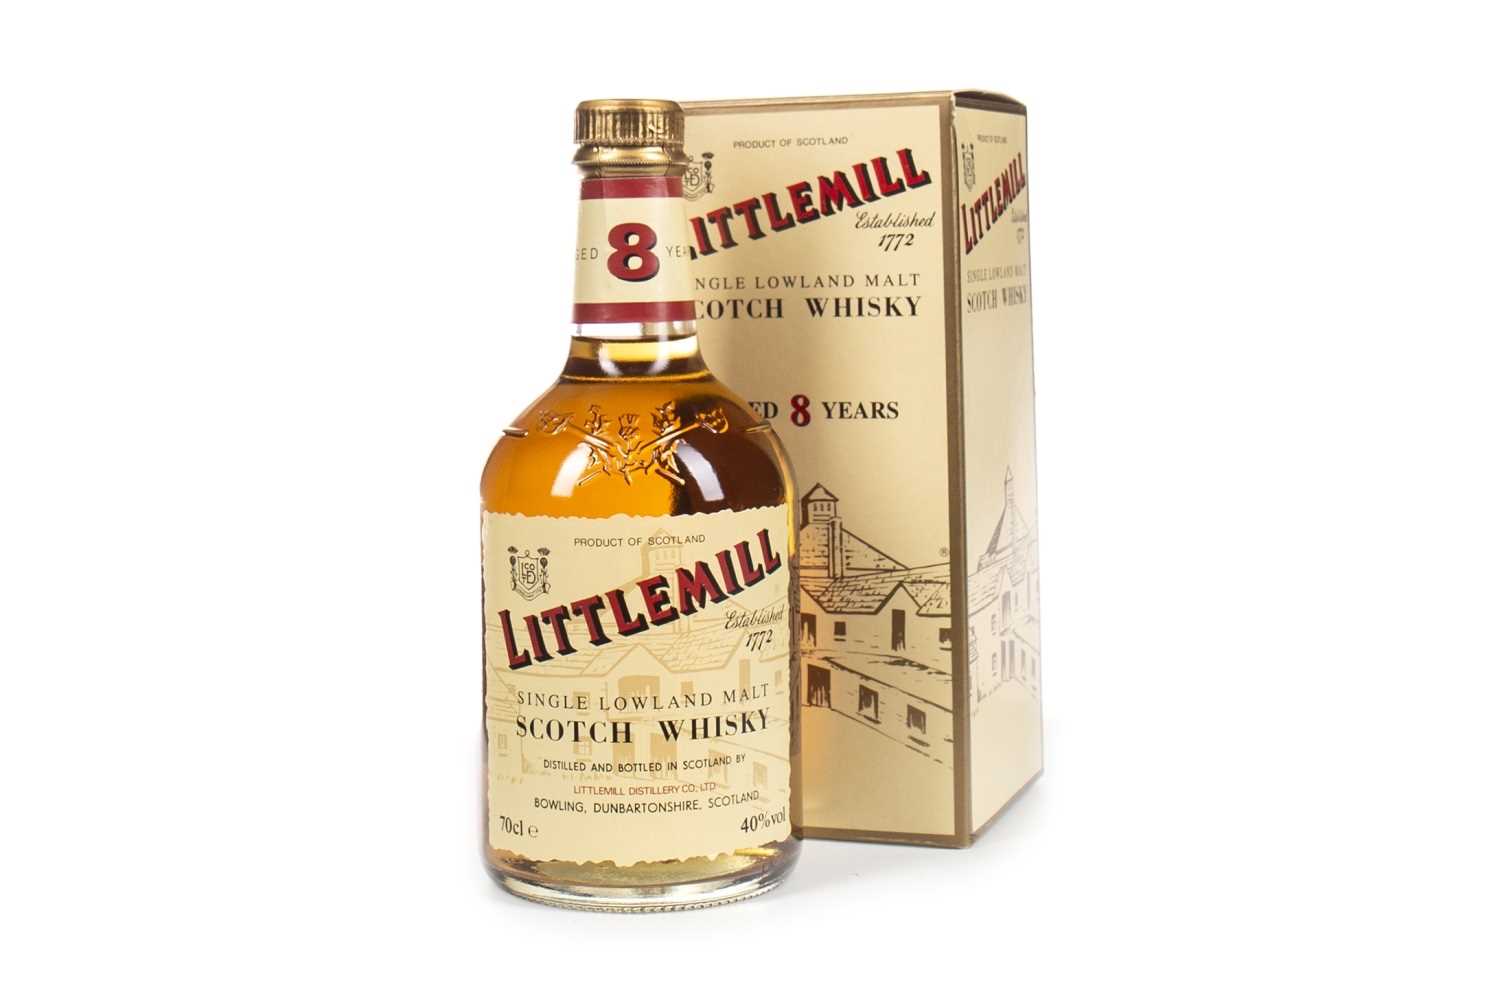 Lot 33 - LITTLEMILL AGED 8 YEARS